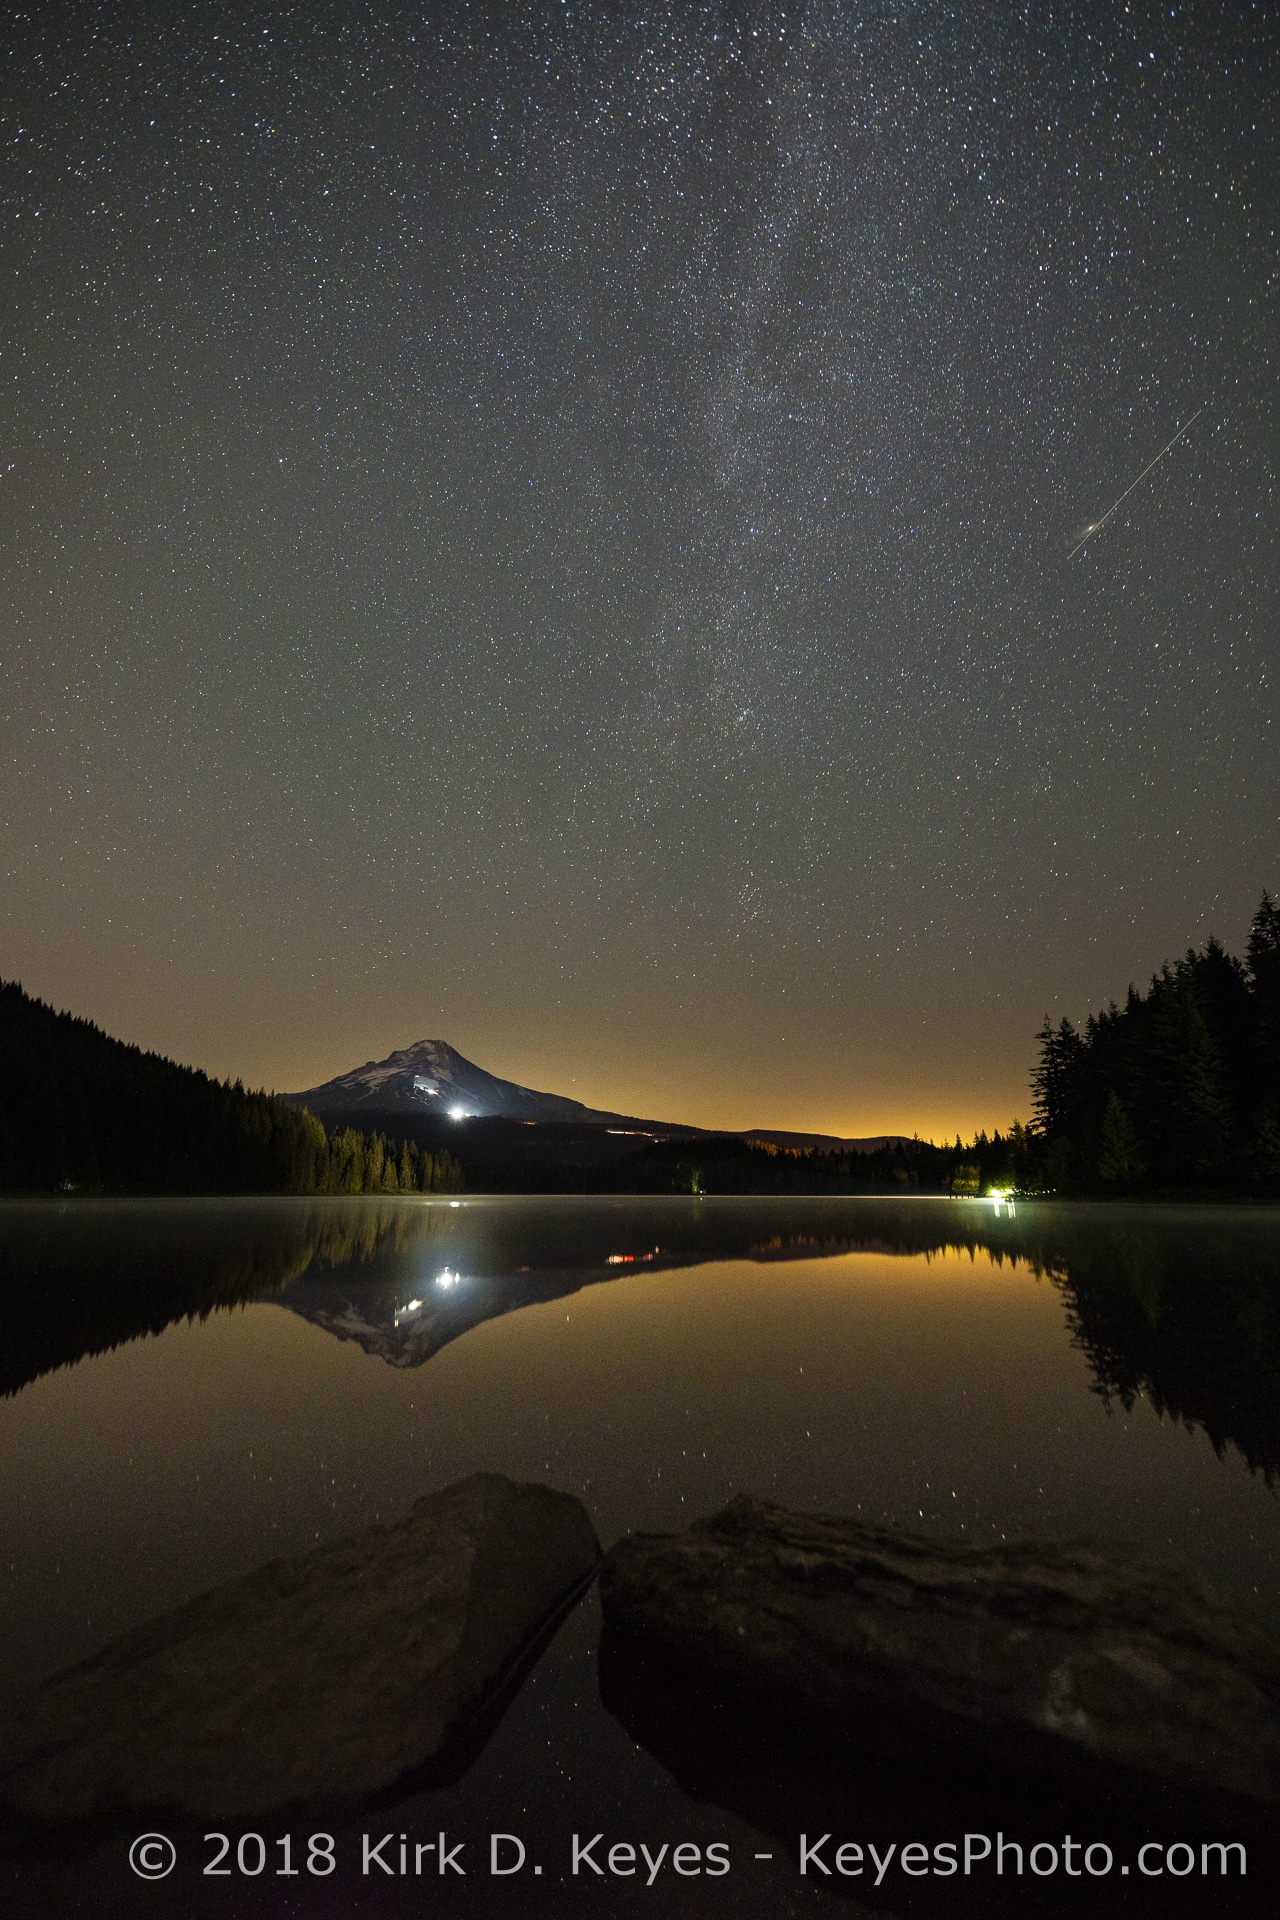 Perseid Meteor passing in front of the Andromeda Galaxy along side the Milky Way Galaxy, Mt. Hood at Trillium Lake, OR - Astro-Landscape September 2018 - keyesphoto.com